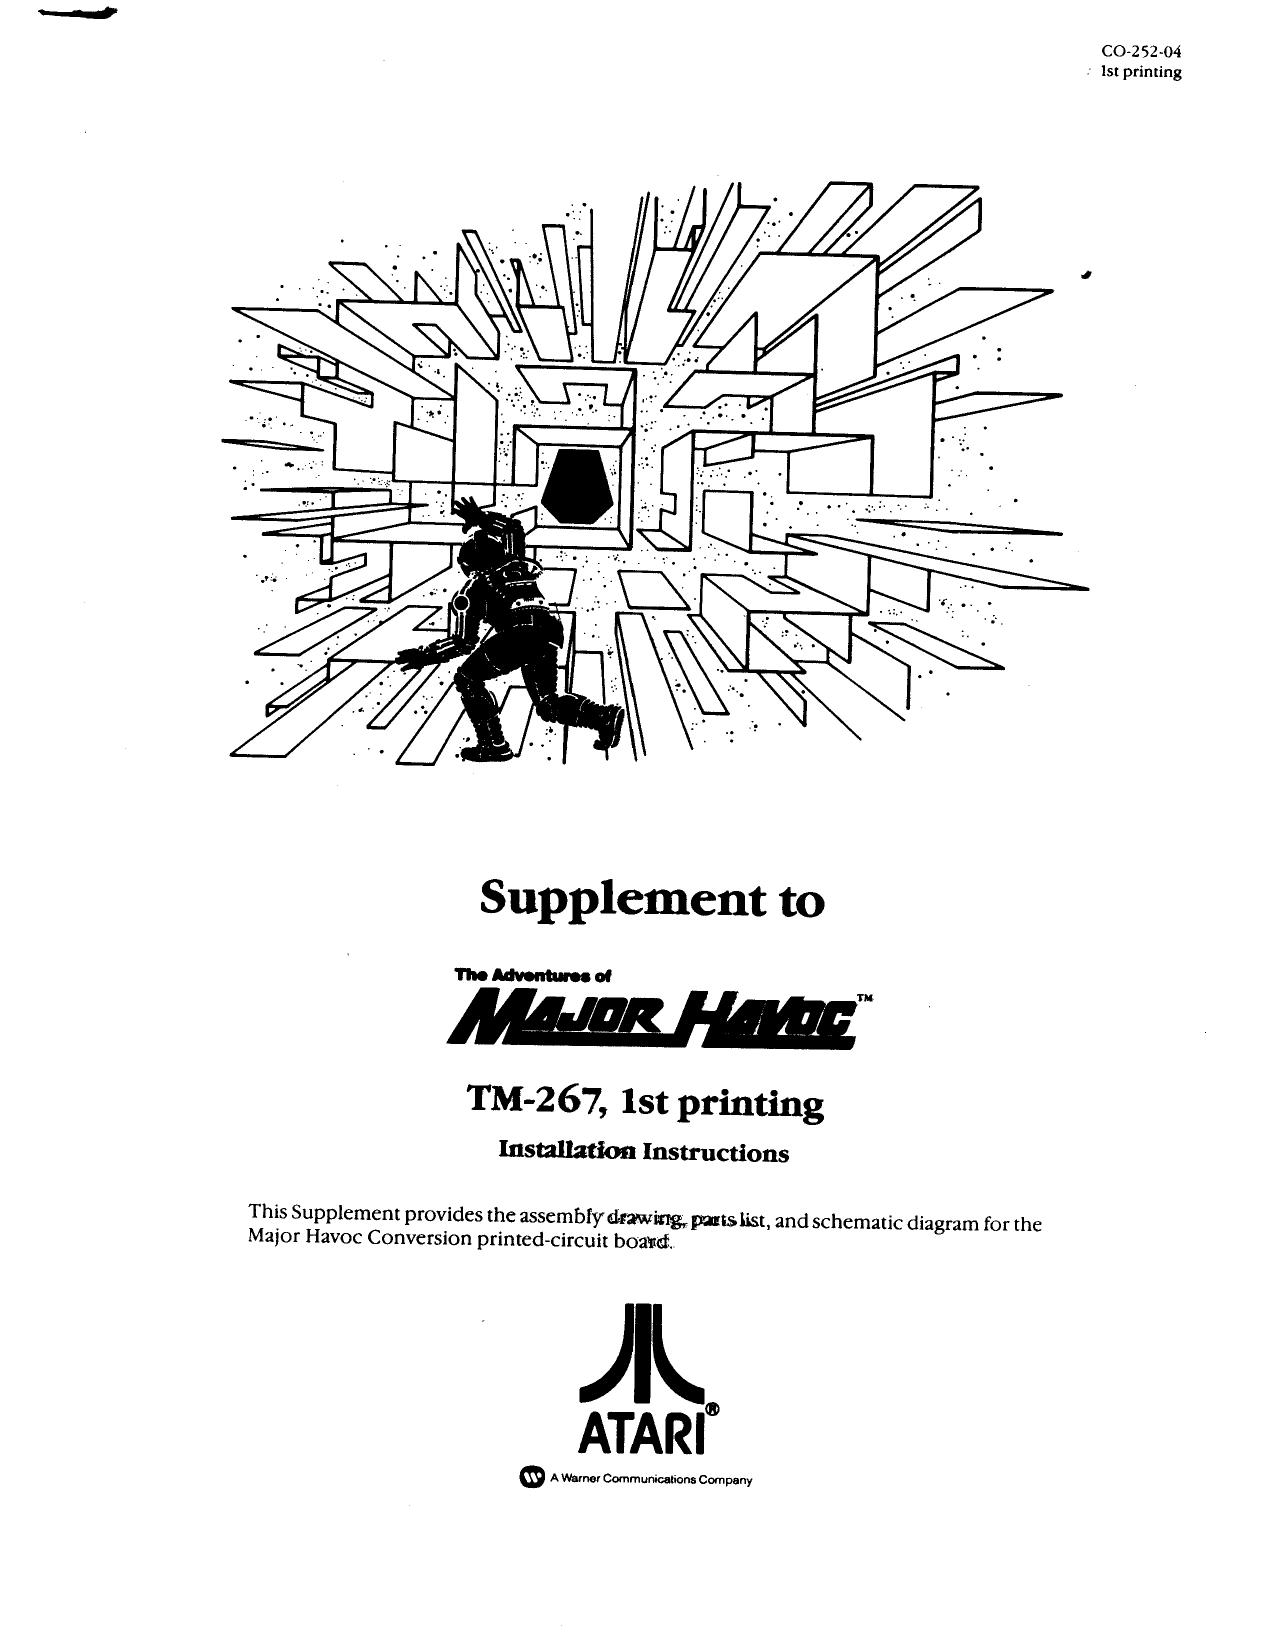 The Adventures of Major Havoc (CO-252-04 1st Printing) (Drawing Package for Conv. PCB) (U)